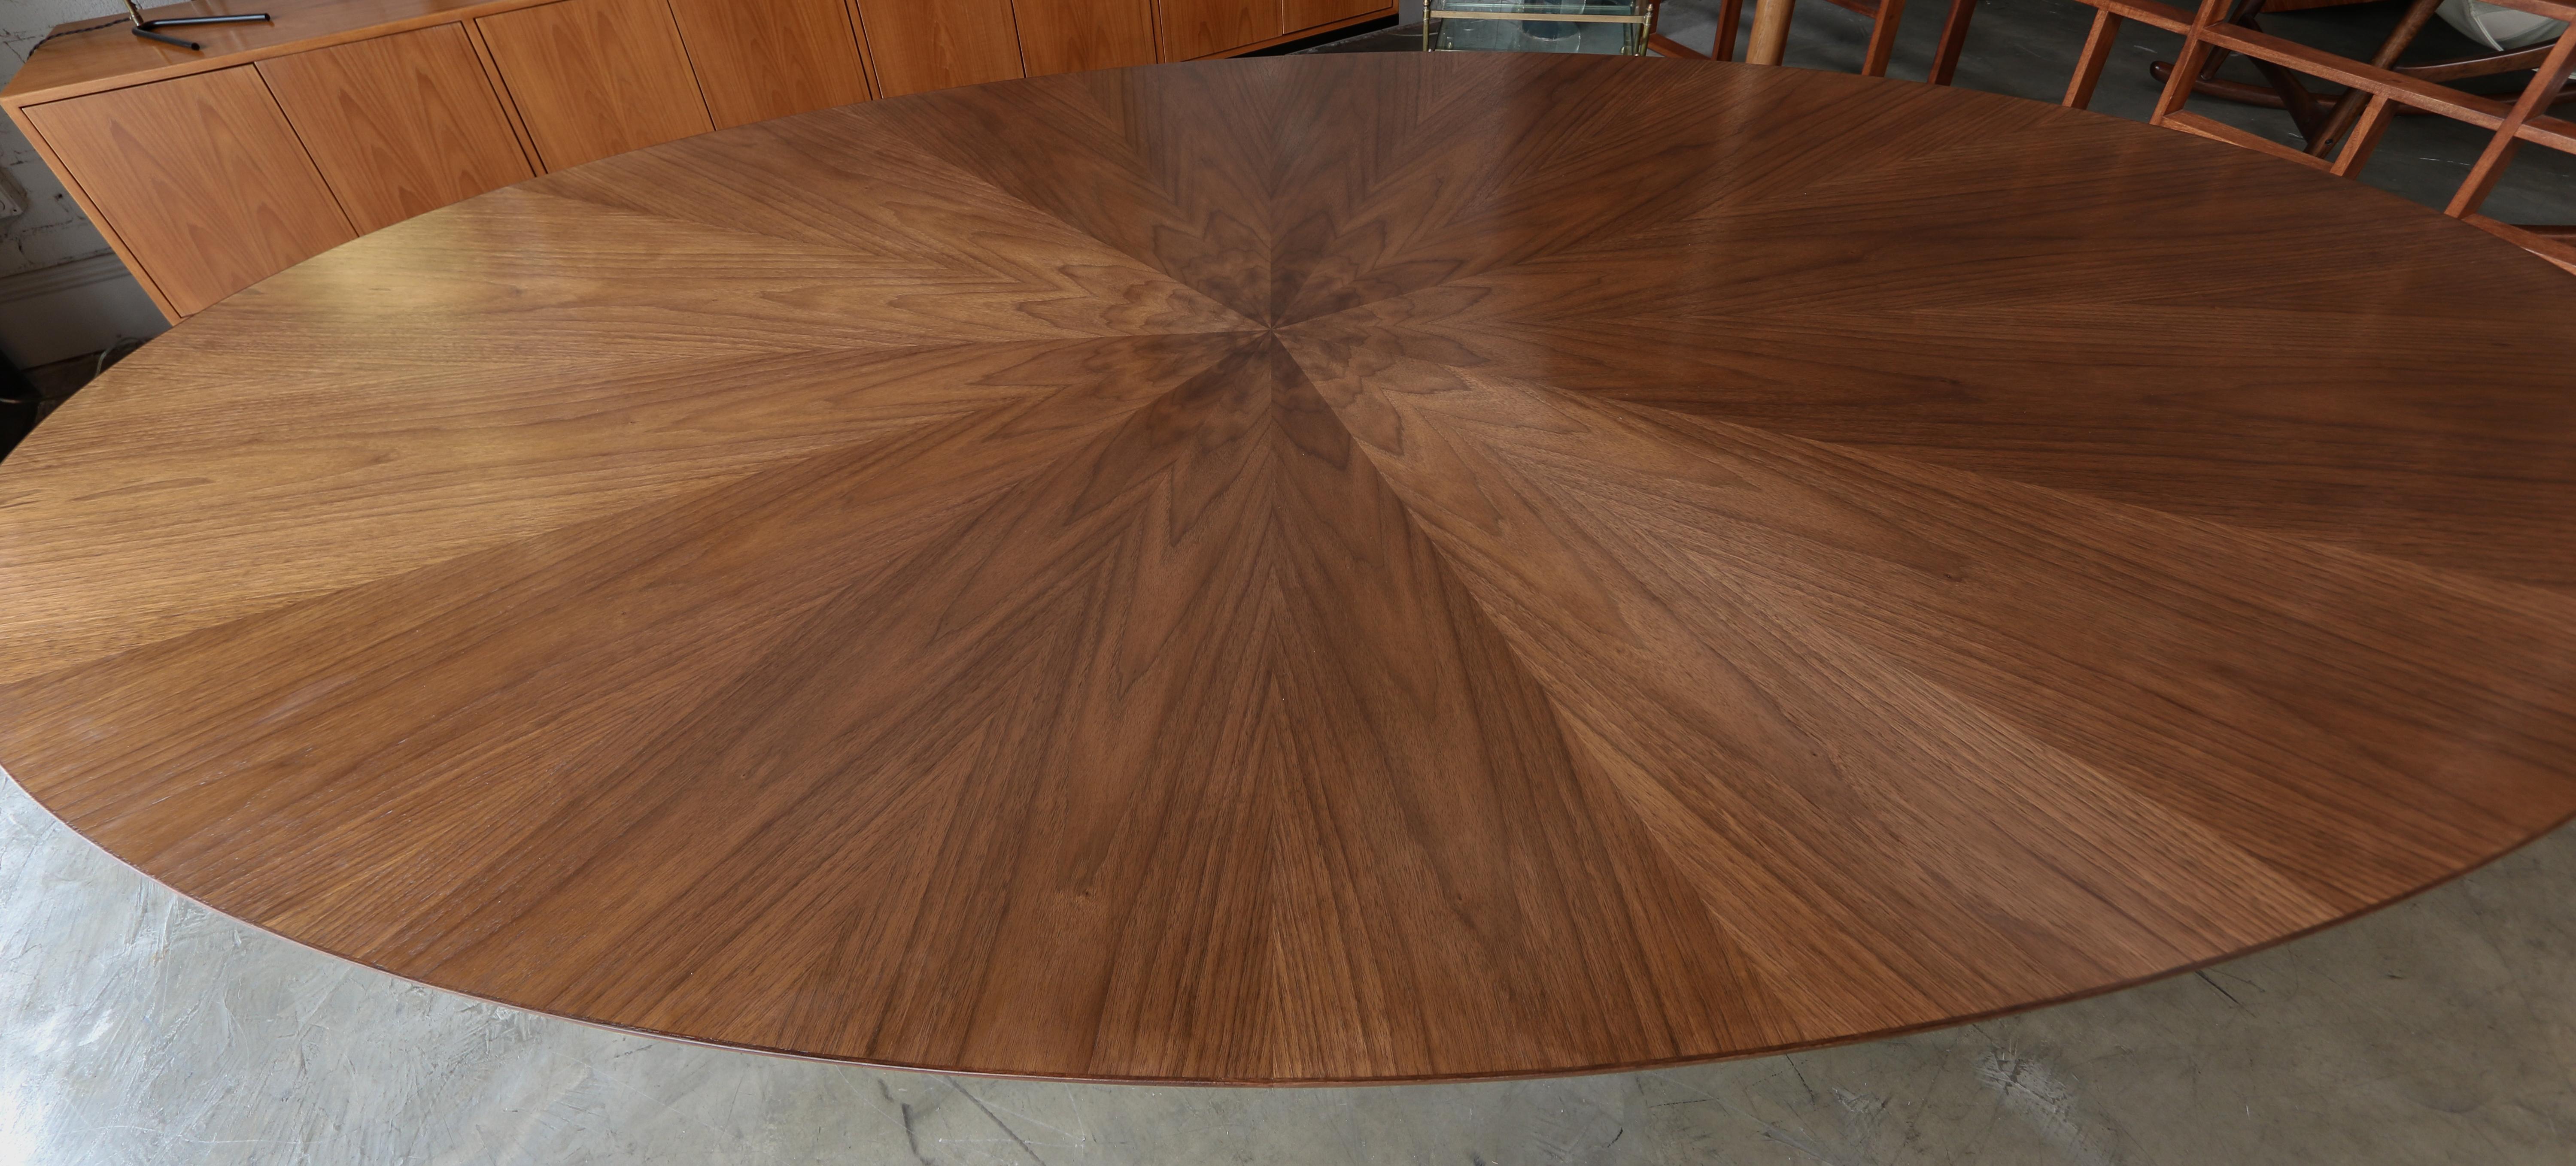 Custom Midcentury Style Walnut Oval Dining Table with Flower Detail by Adesso For Sale 1